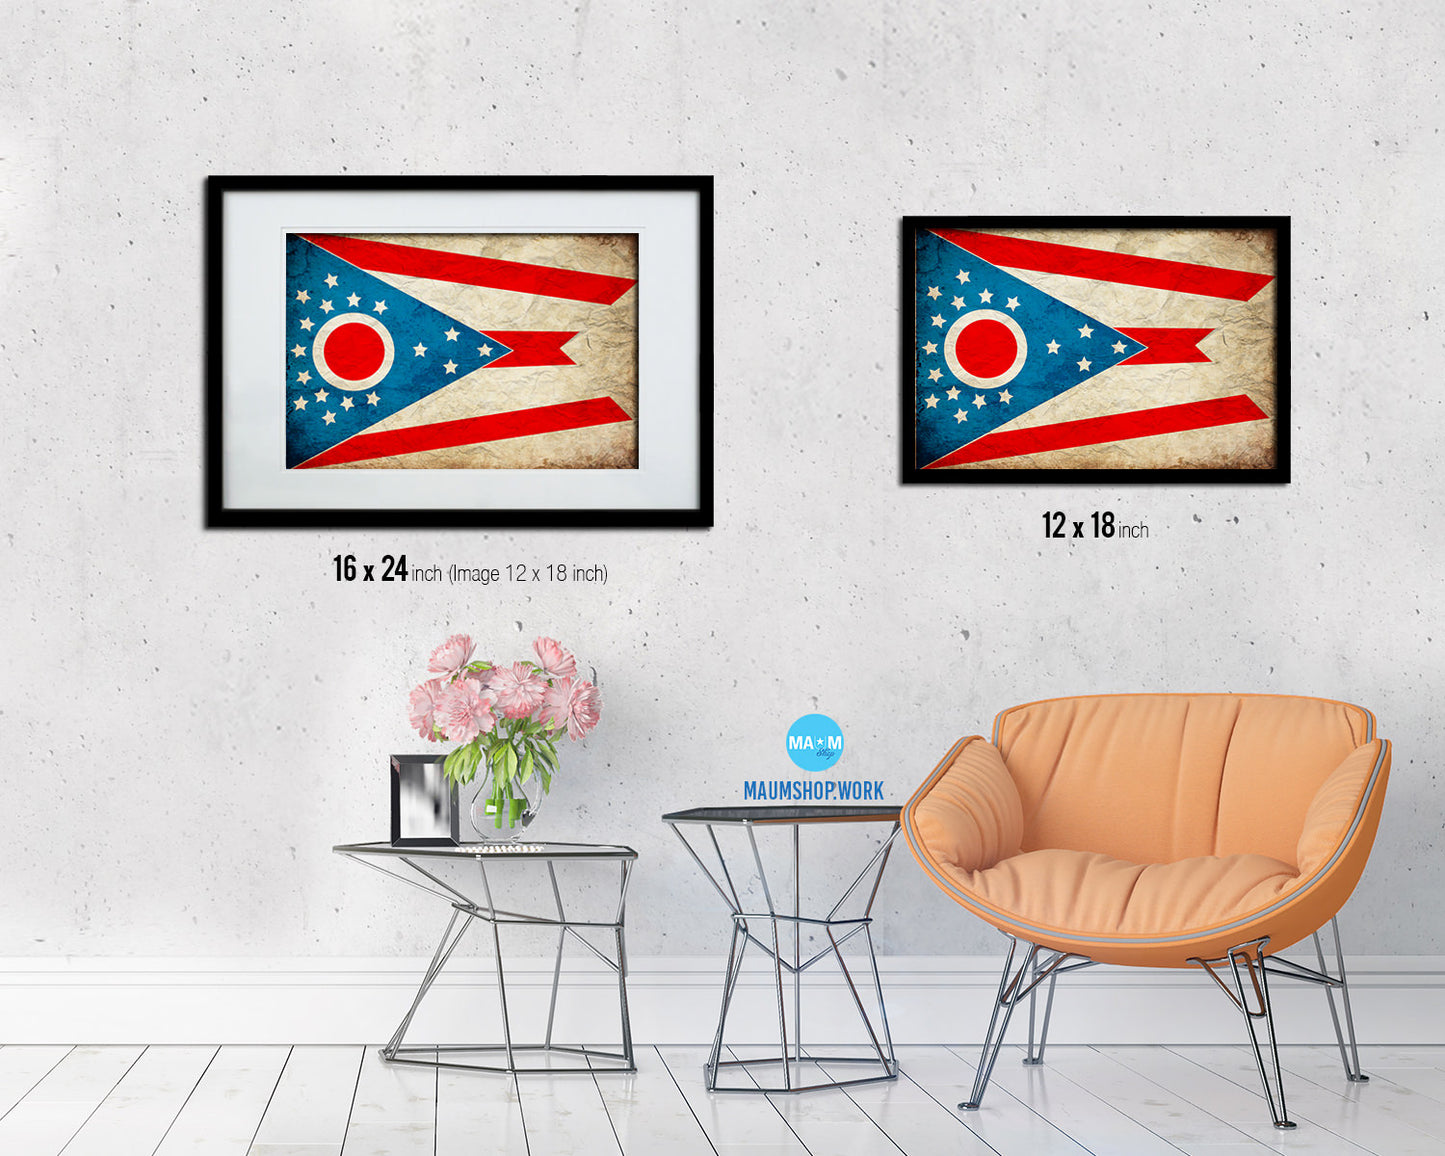 Ohio State Vintage Flag Wood Framed Paper Print Wall Art Decor Gifts